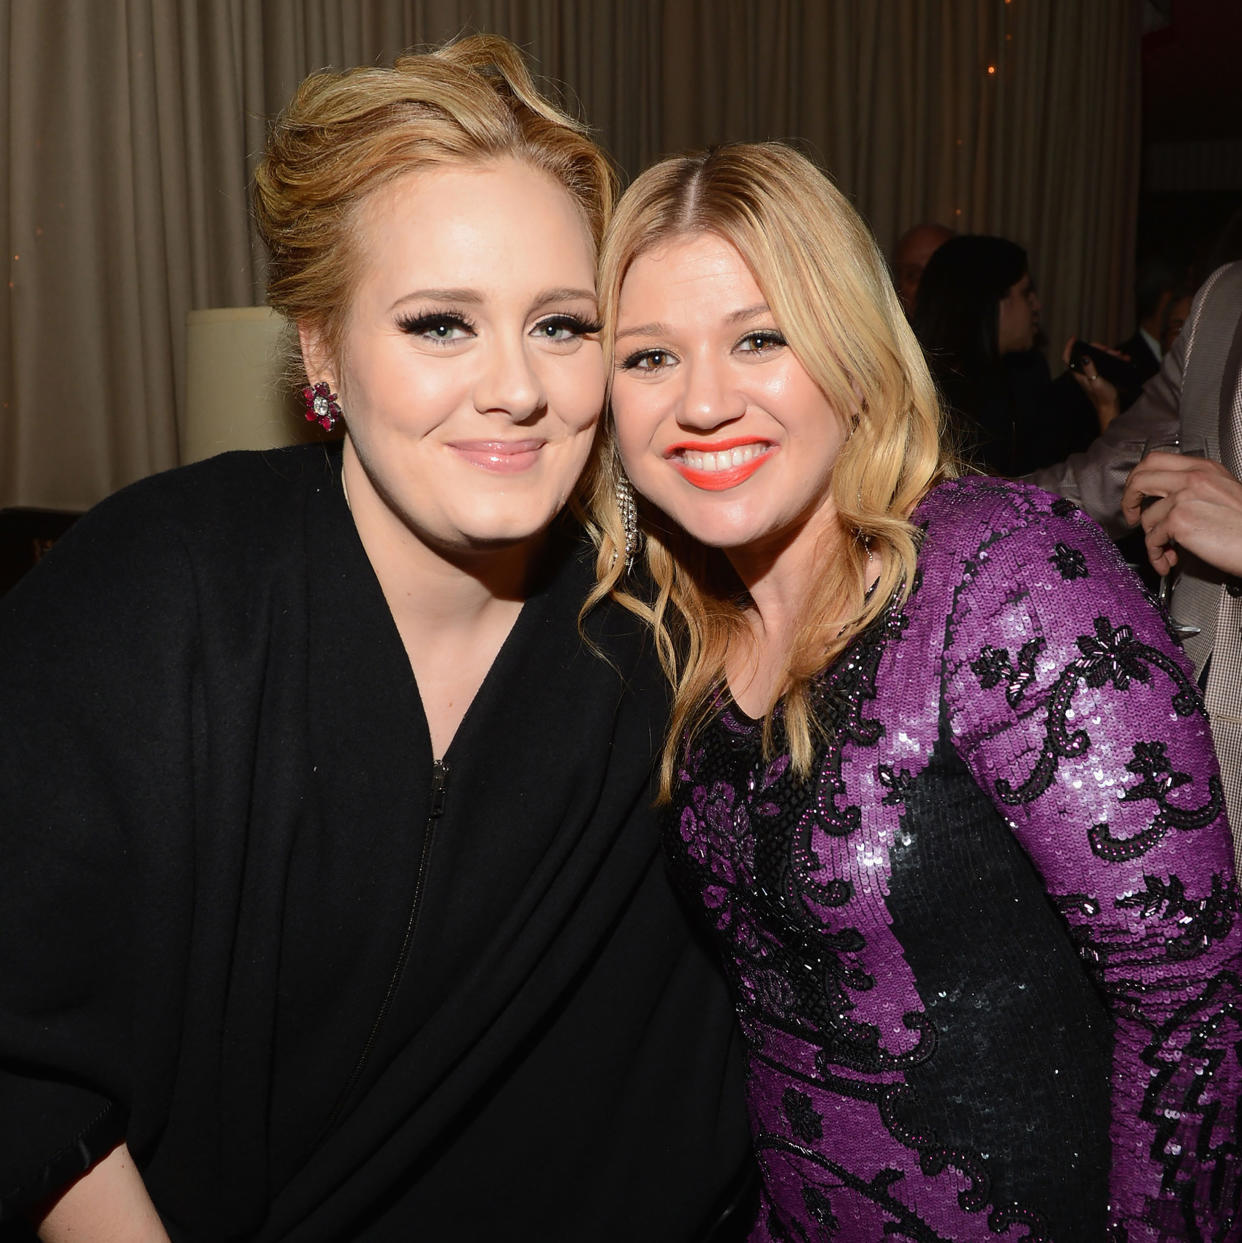 Adele and Kelly Clarkson (Larry Busacca / WireImage)